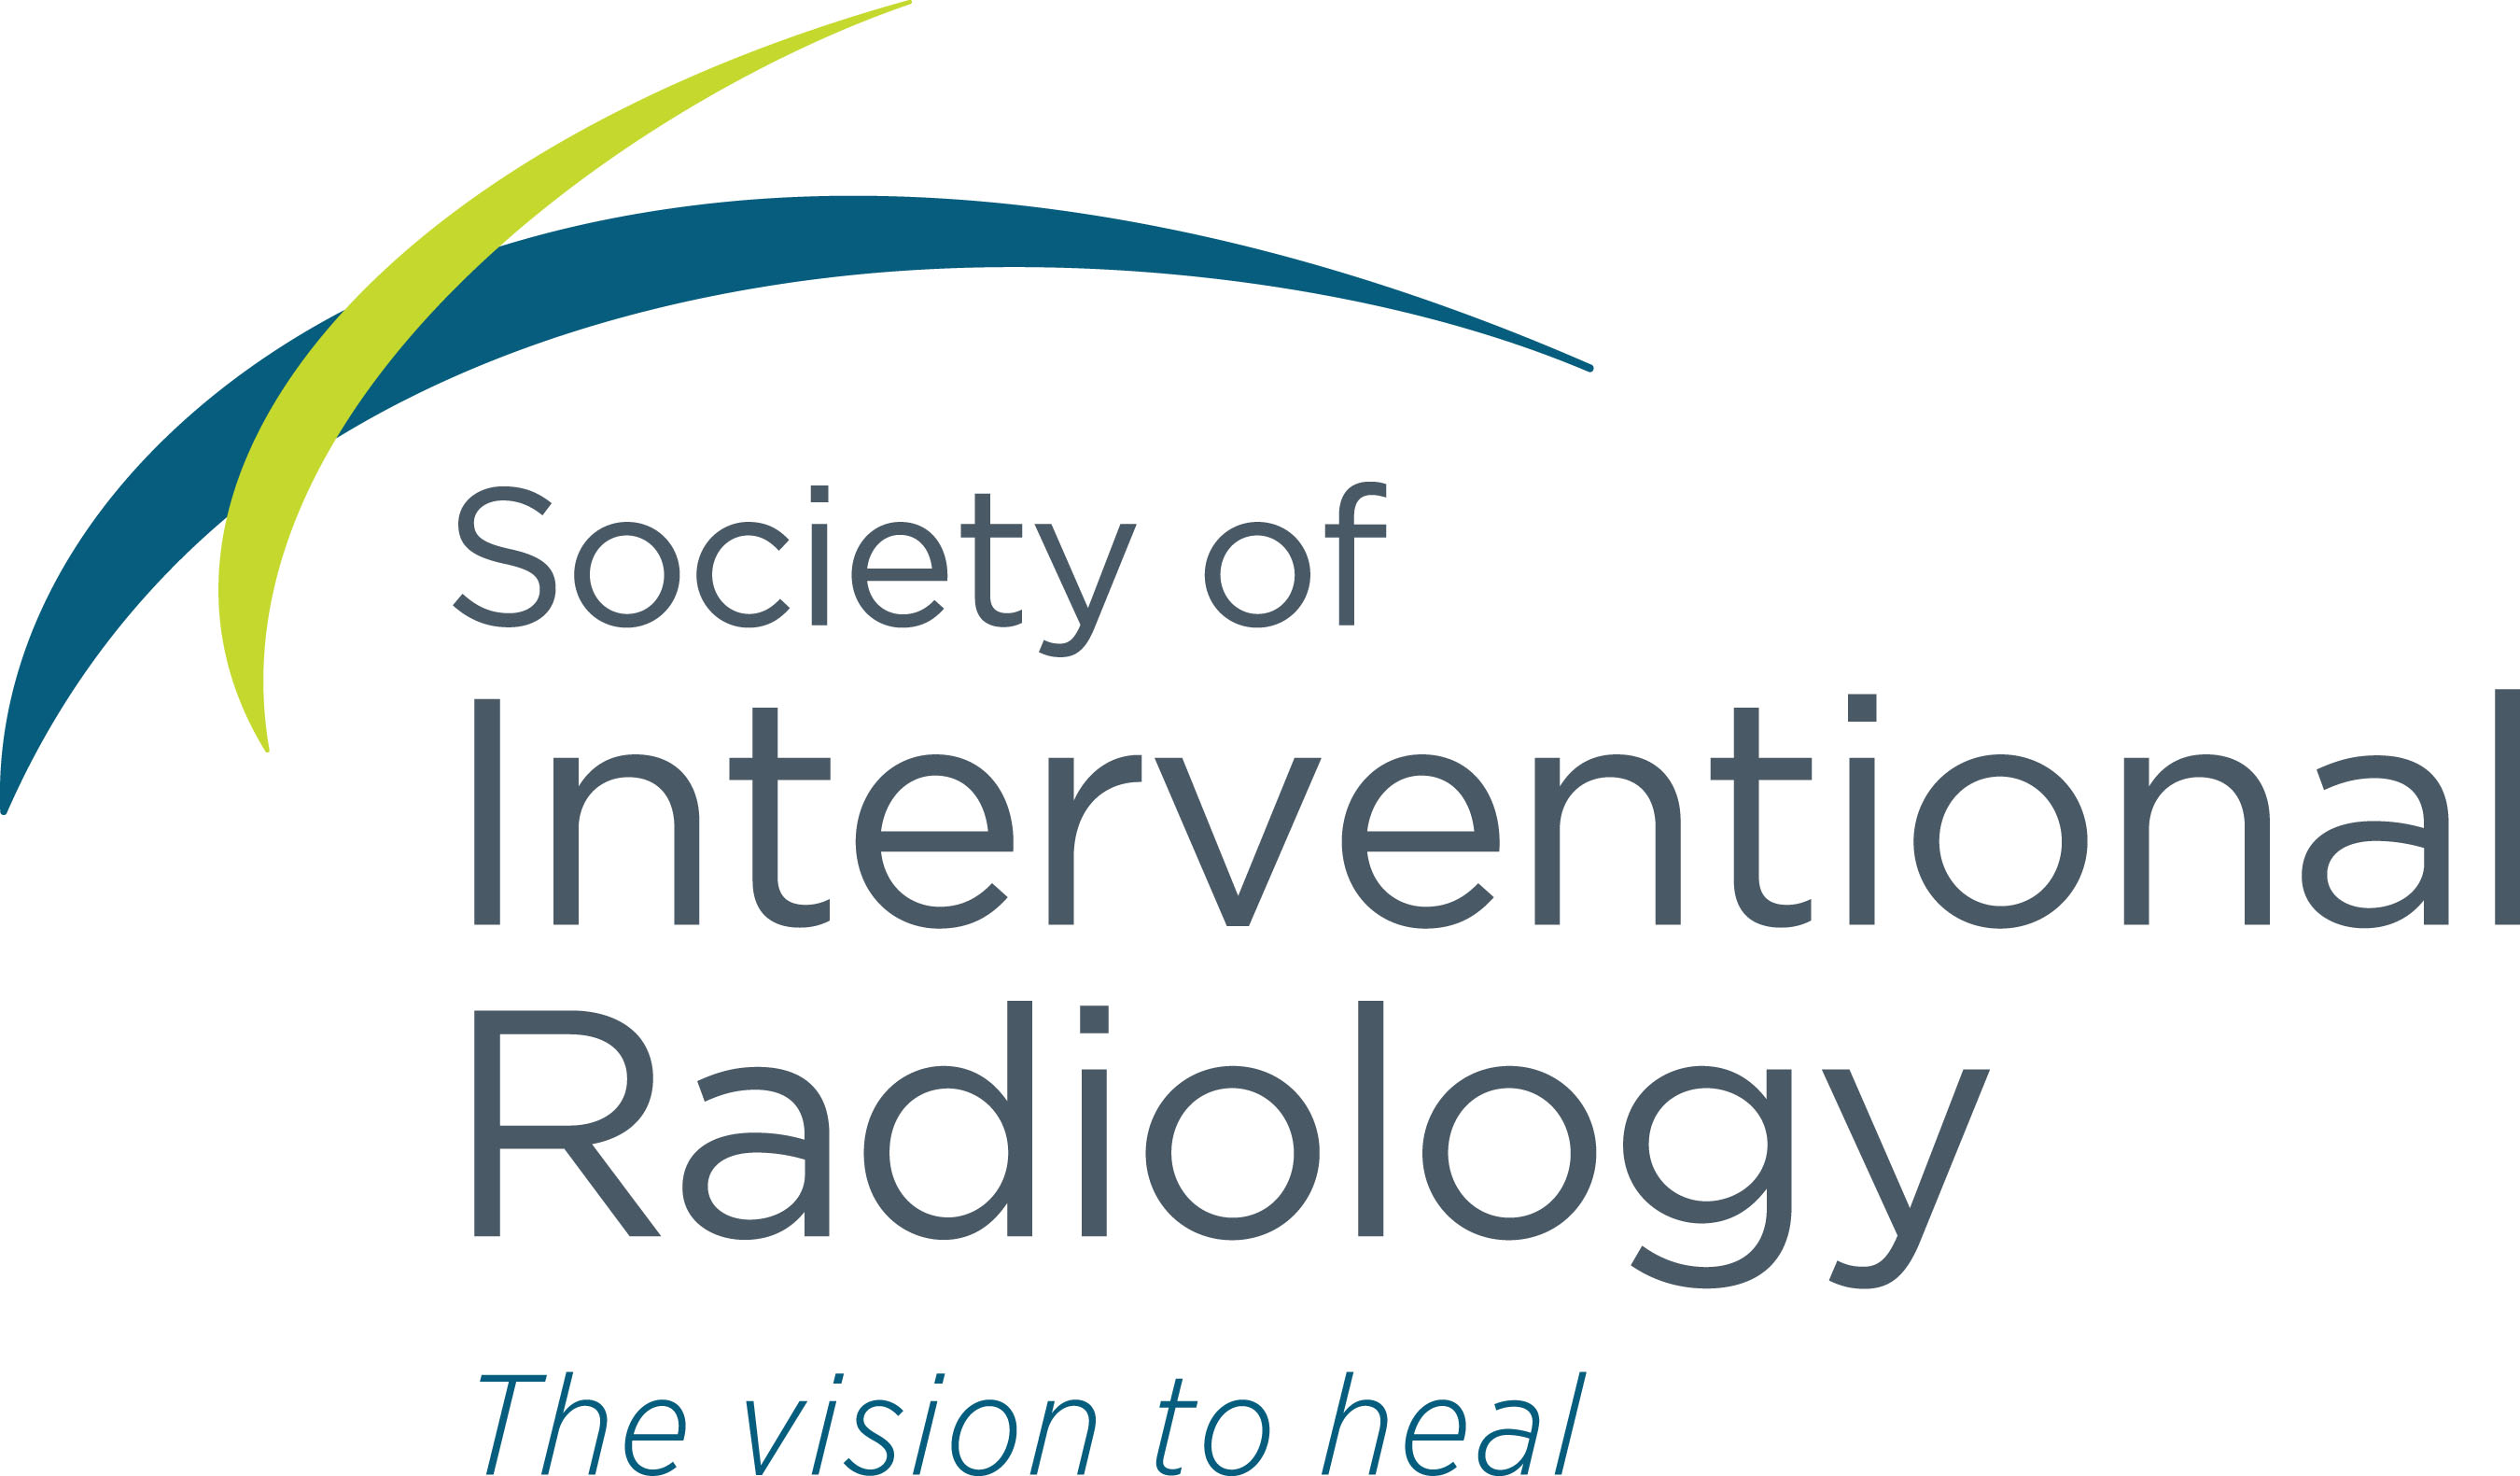 SIR 2022 - The Society of Interventional Radiology 2022 Meeting